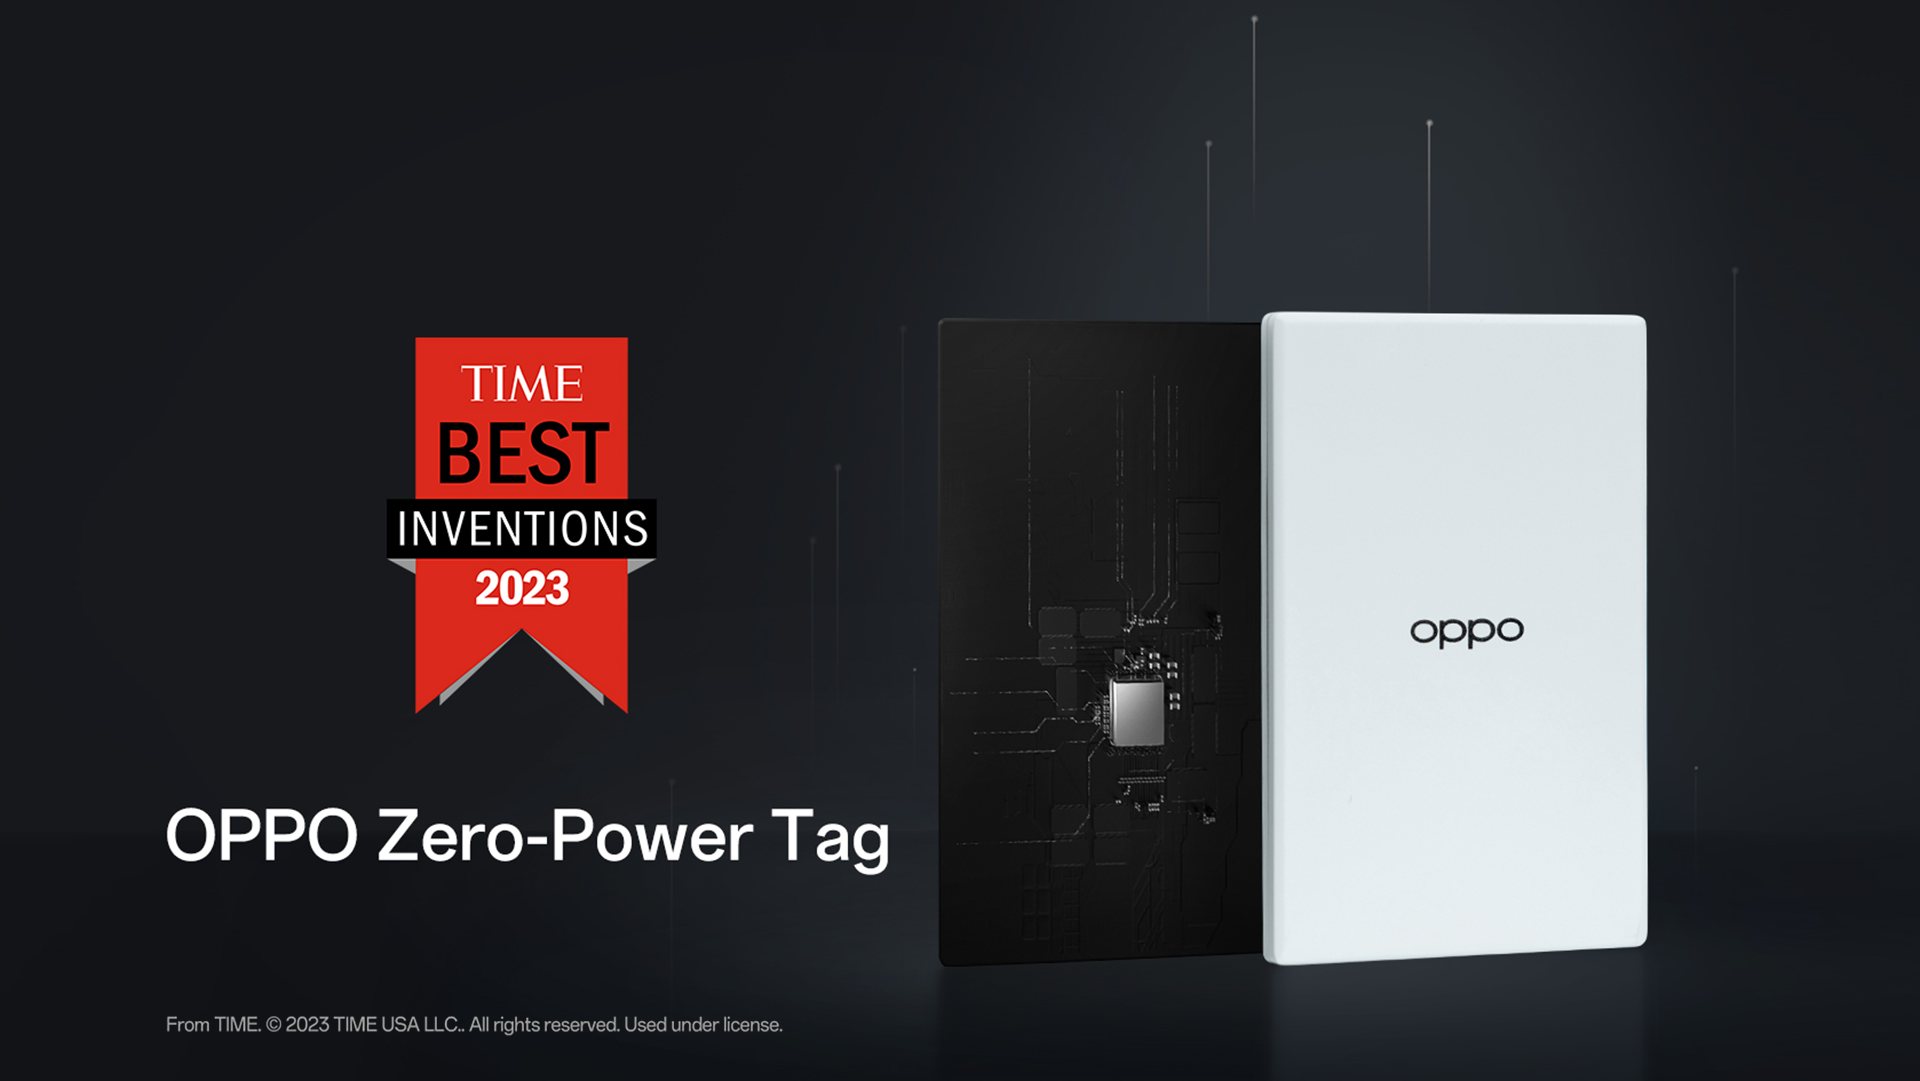 OPPO Zero-Power Tag is Named to TIME’s List of Best Inventions of 2023 for Envisioning a More Sustainable Future -Markedium